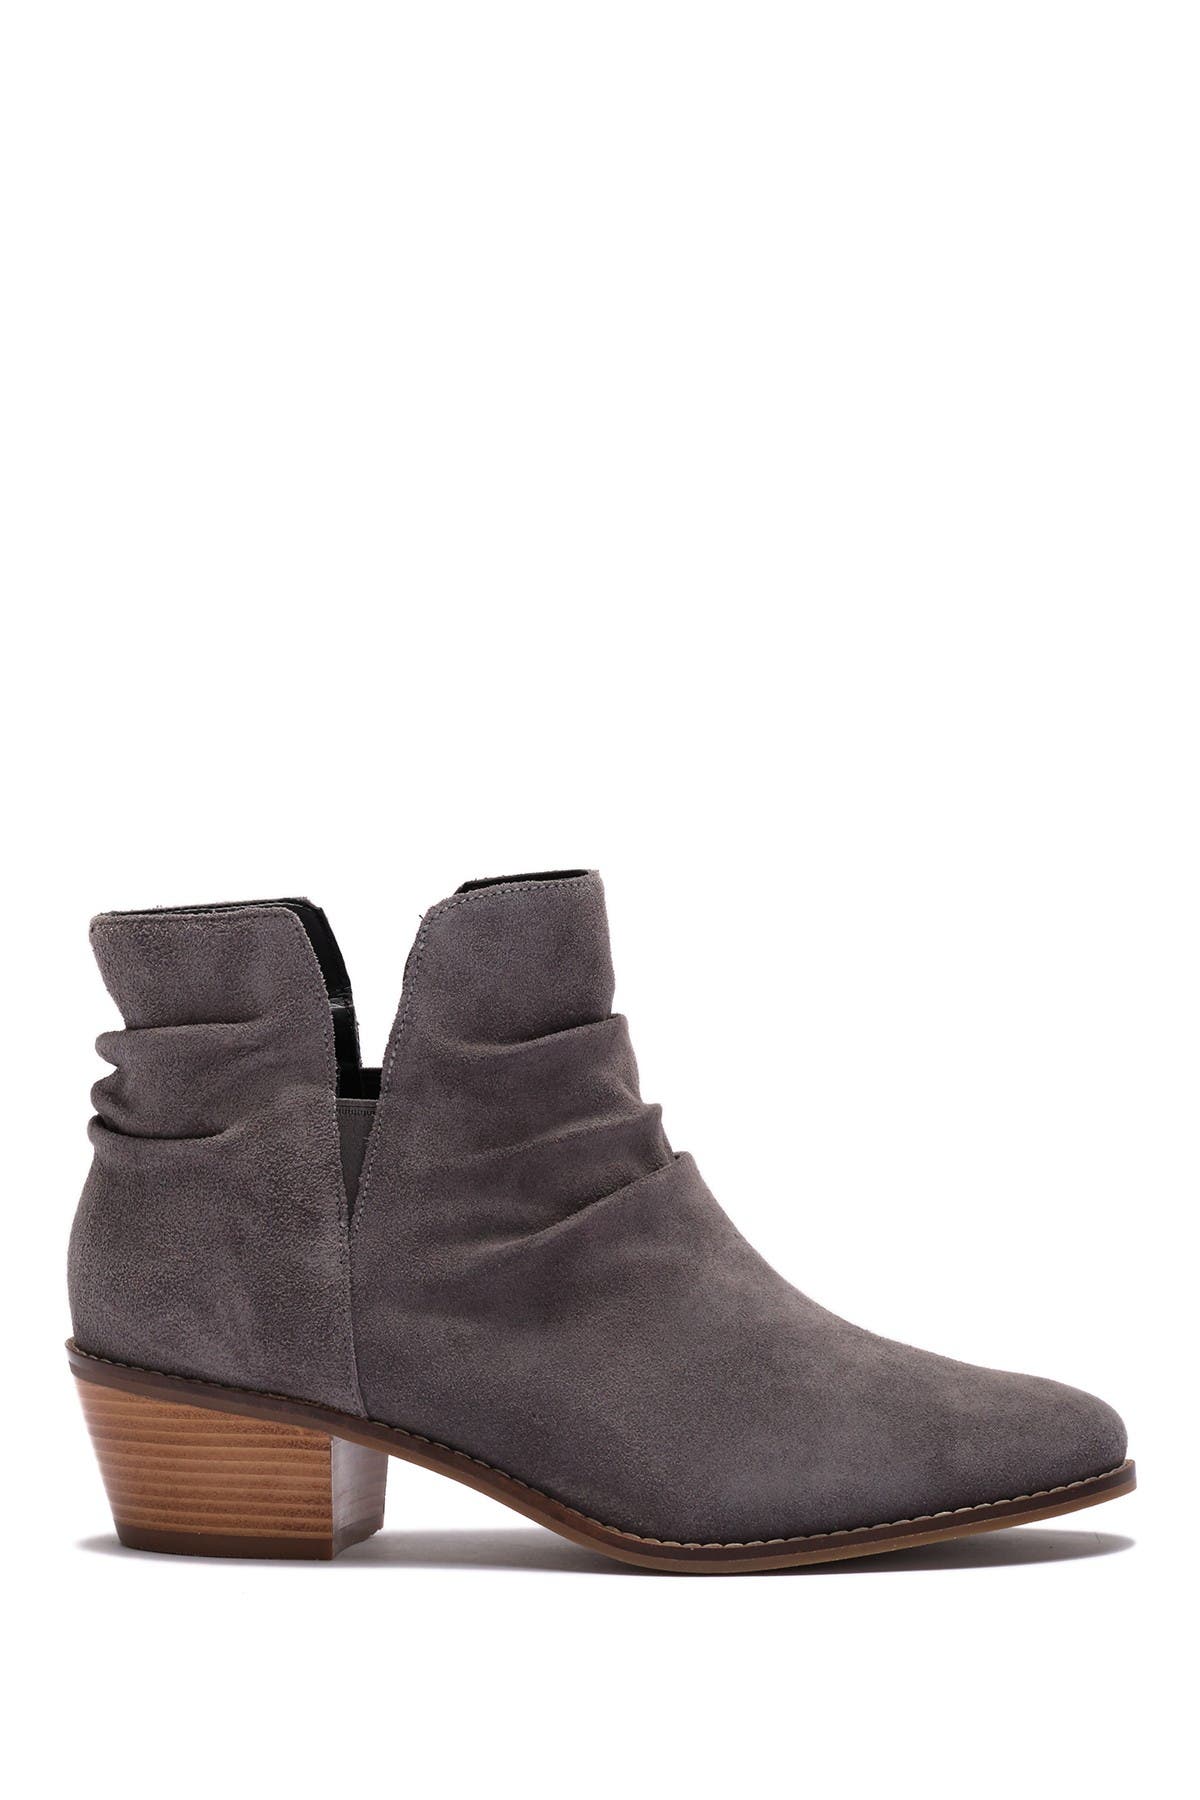 Cole Haan | Alayna Slouch Suede Bootie 